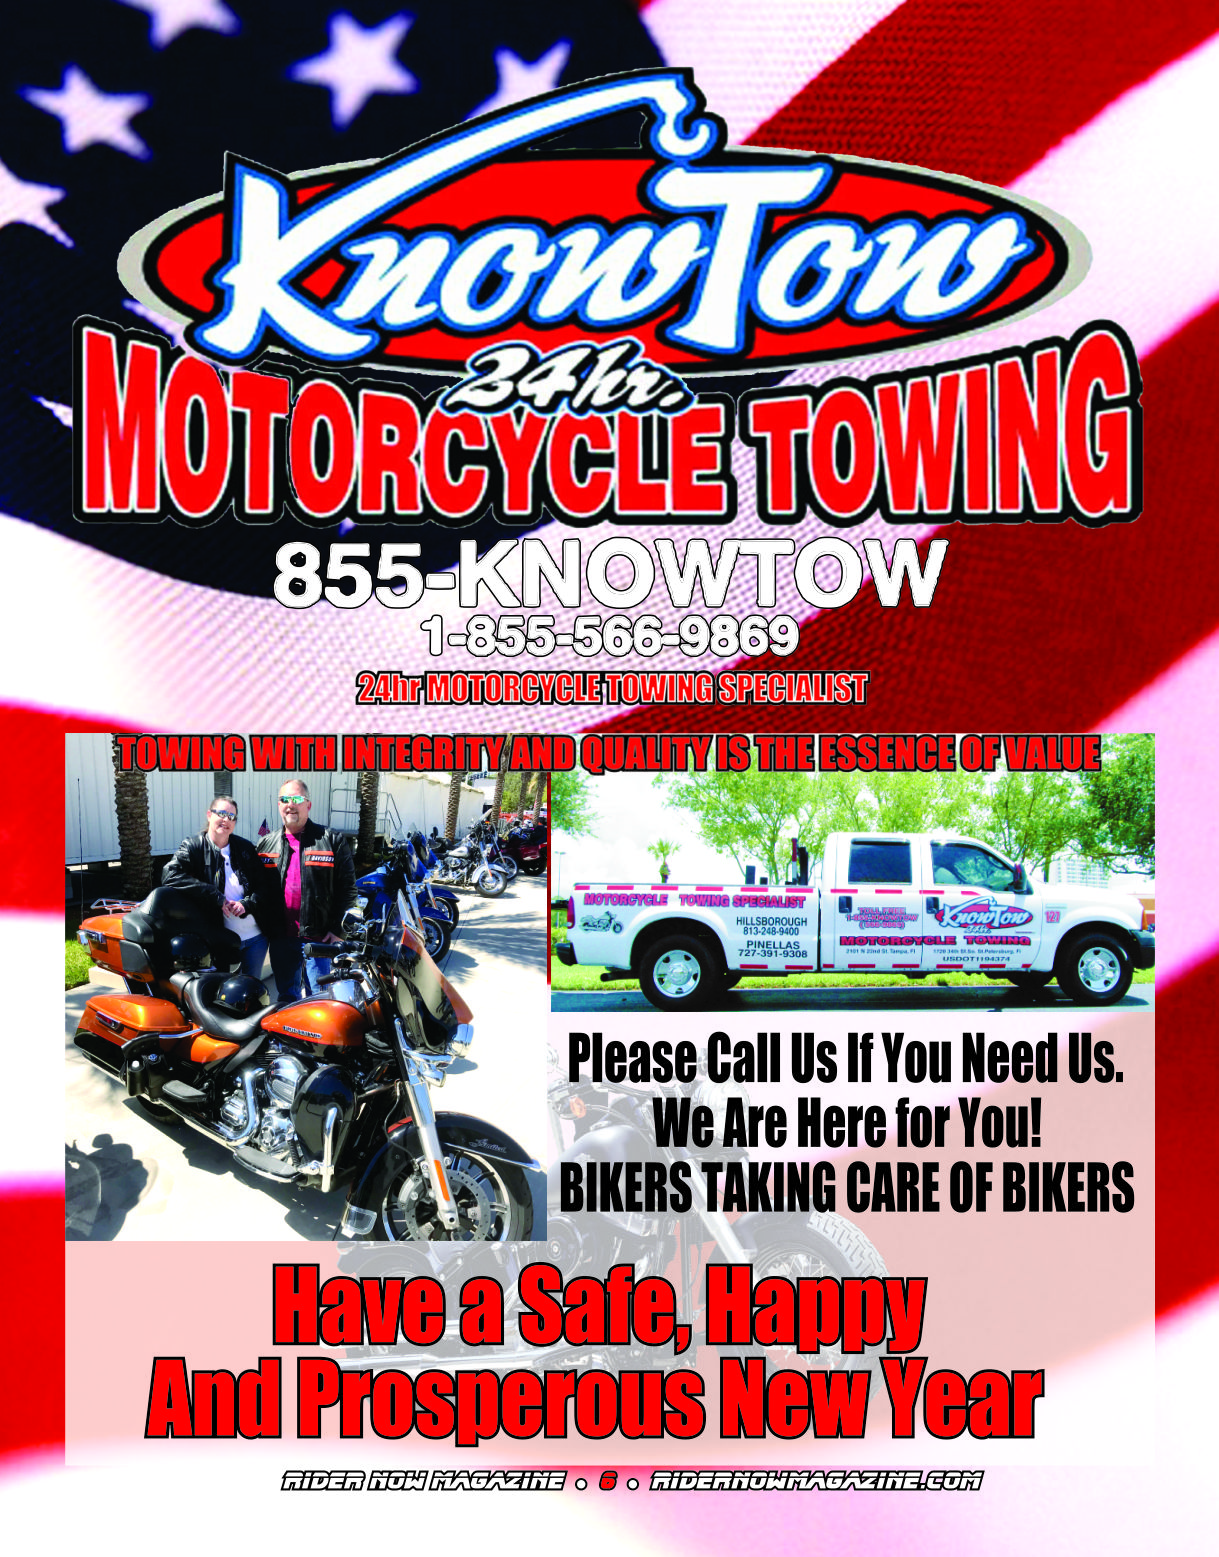 KnowTow Motorcycle Towing